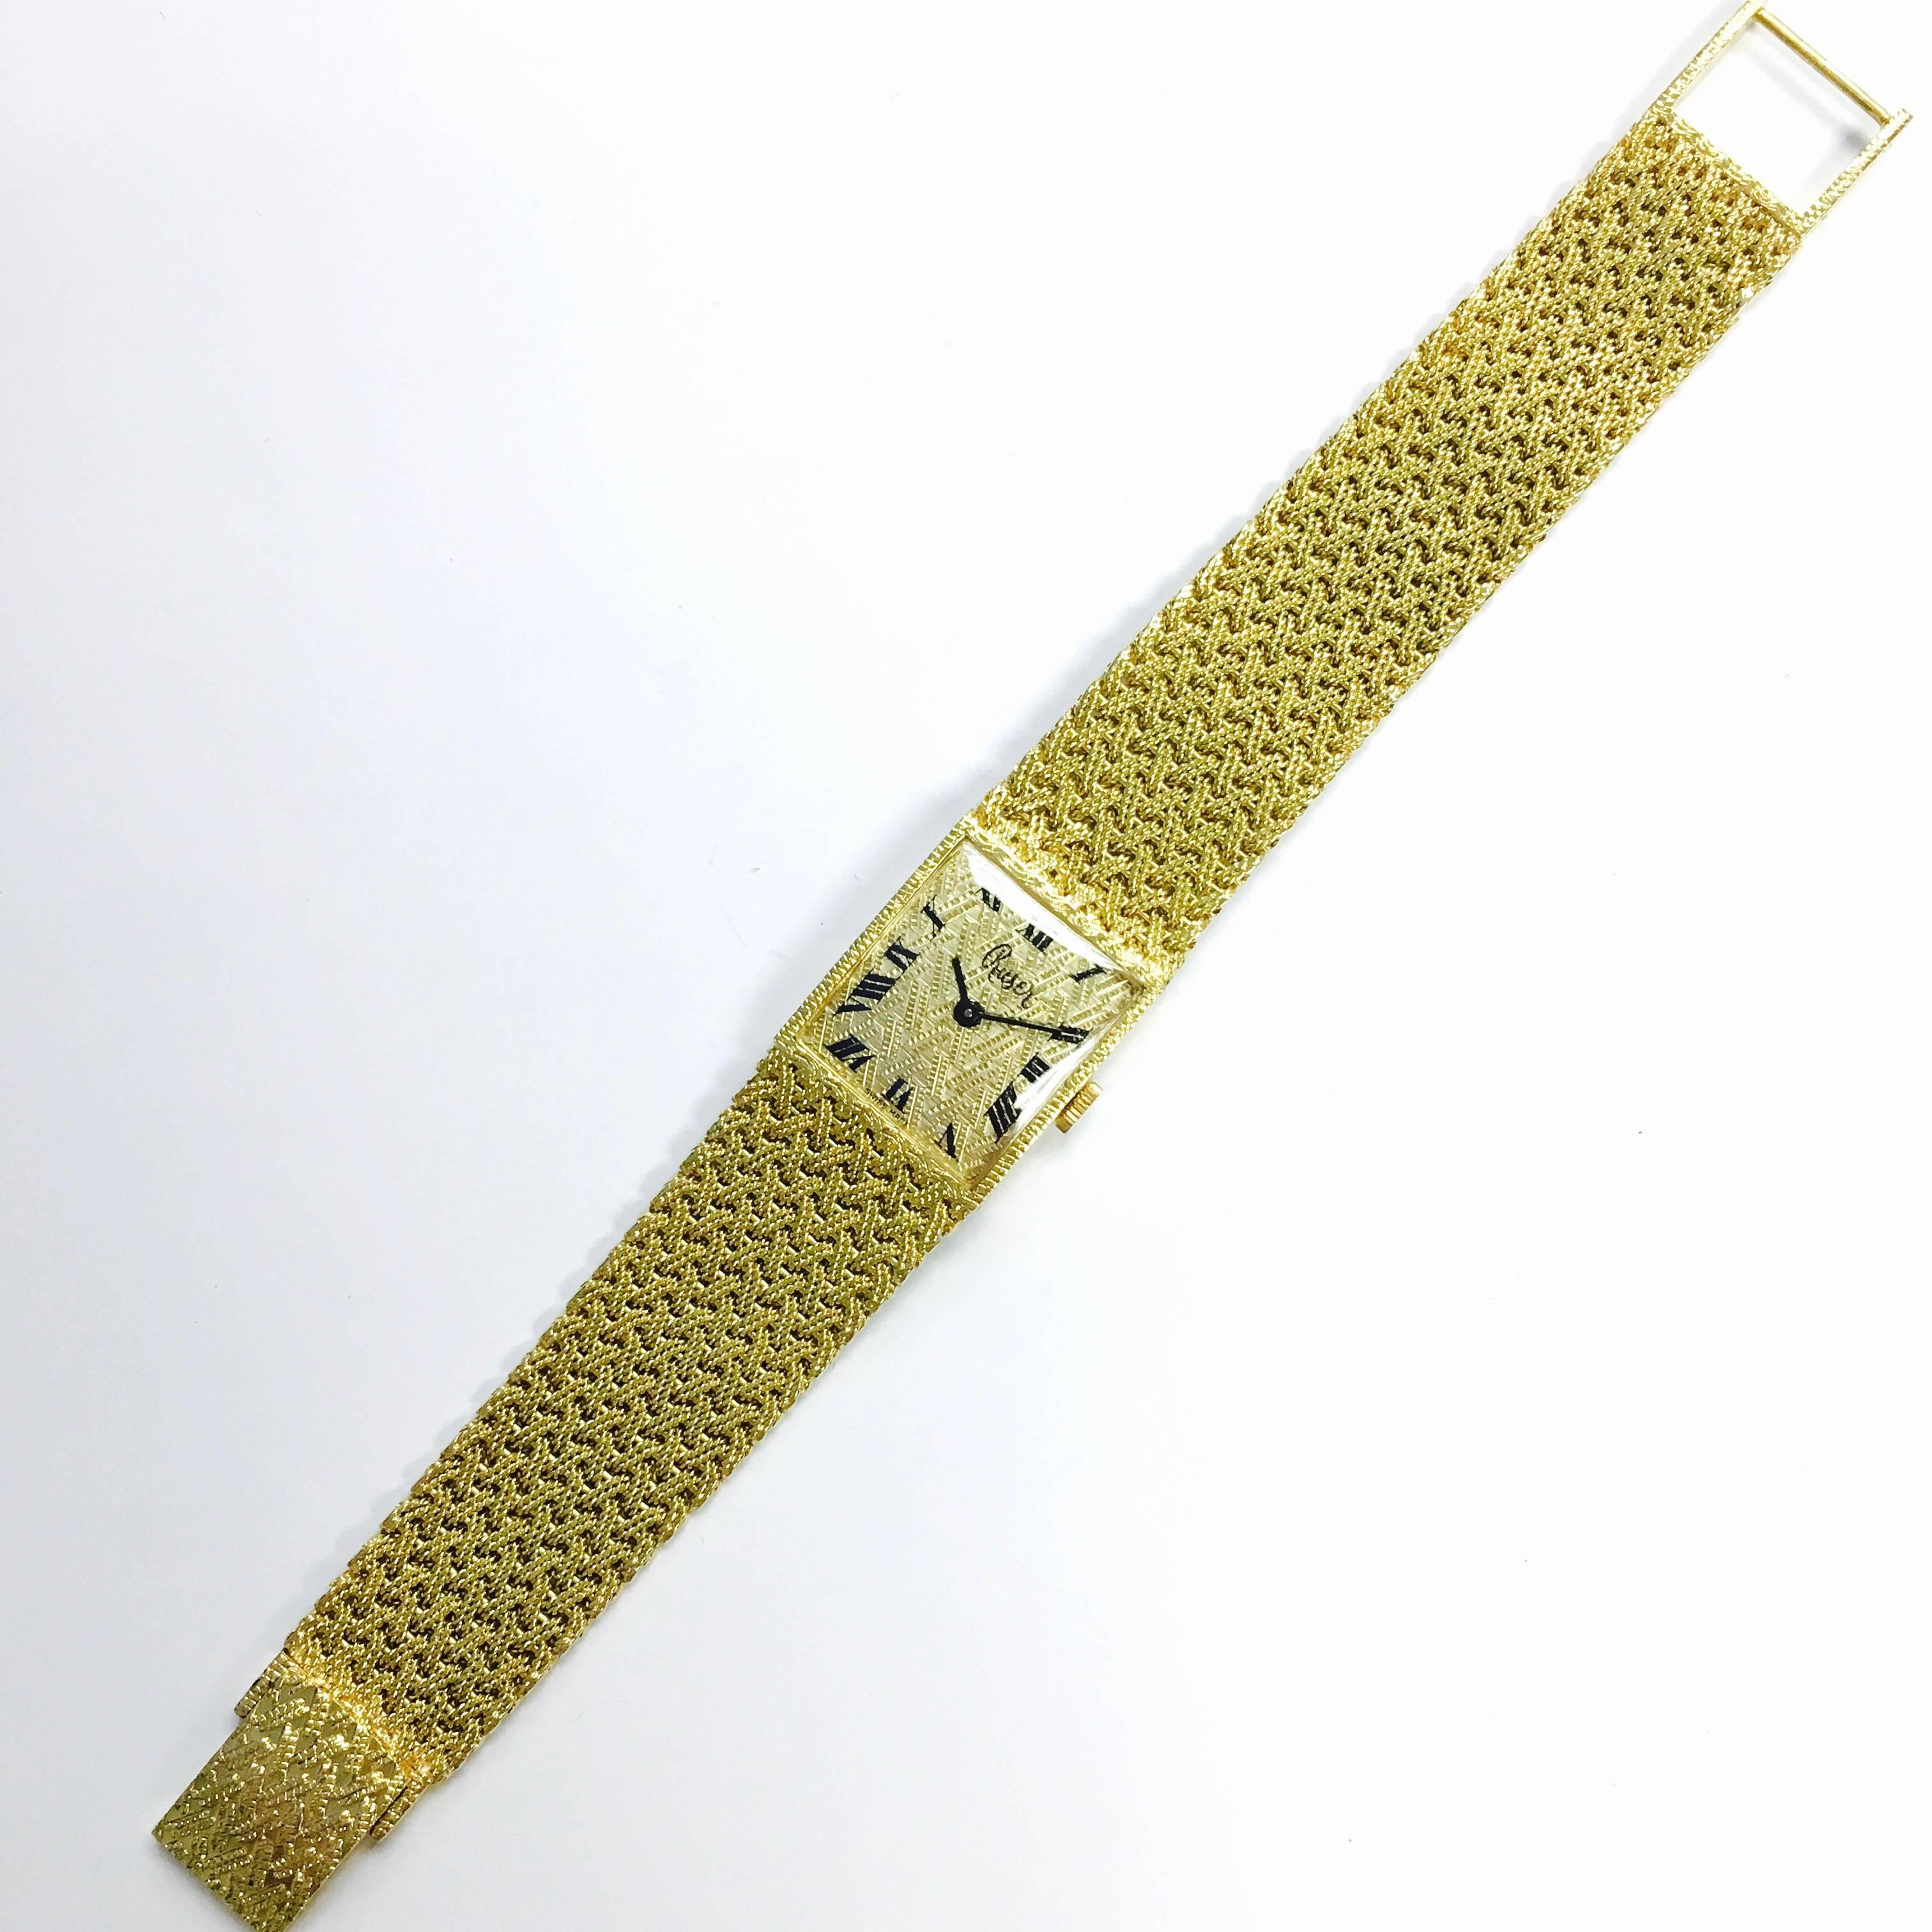 Rare ladies Ruser 18K yellow gold woven mesh bracelet watch. 
Measurements:
Case: 20.5 mm x 18.5 mm
Length: 6.5 inches
Weight: 44 grams
The back of the case engraved: E.S.D. 
Also marked YG and the serial number.
